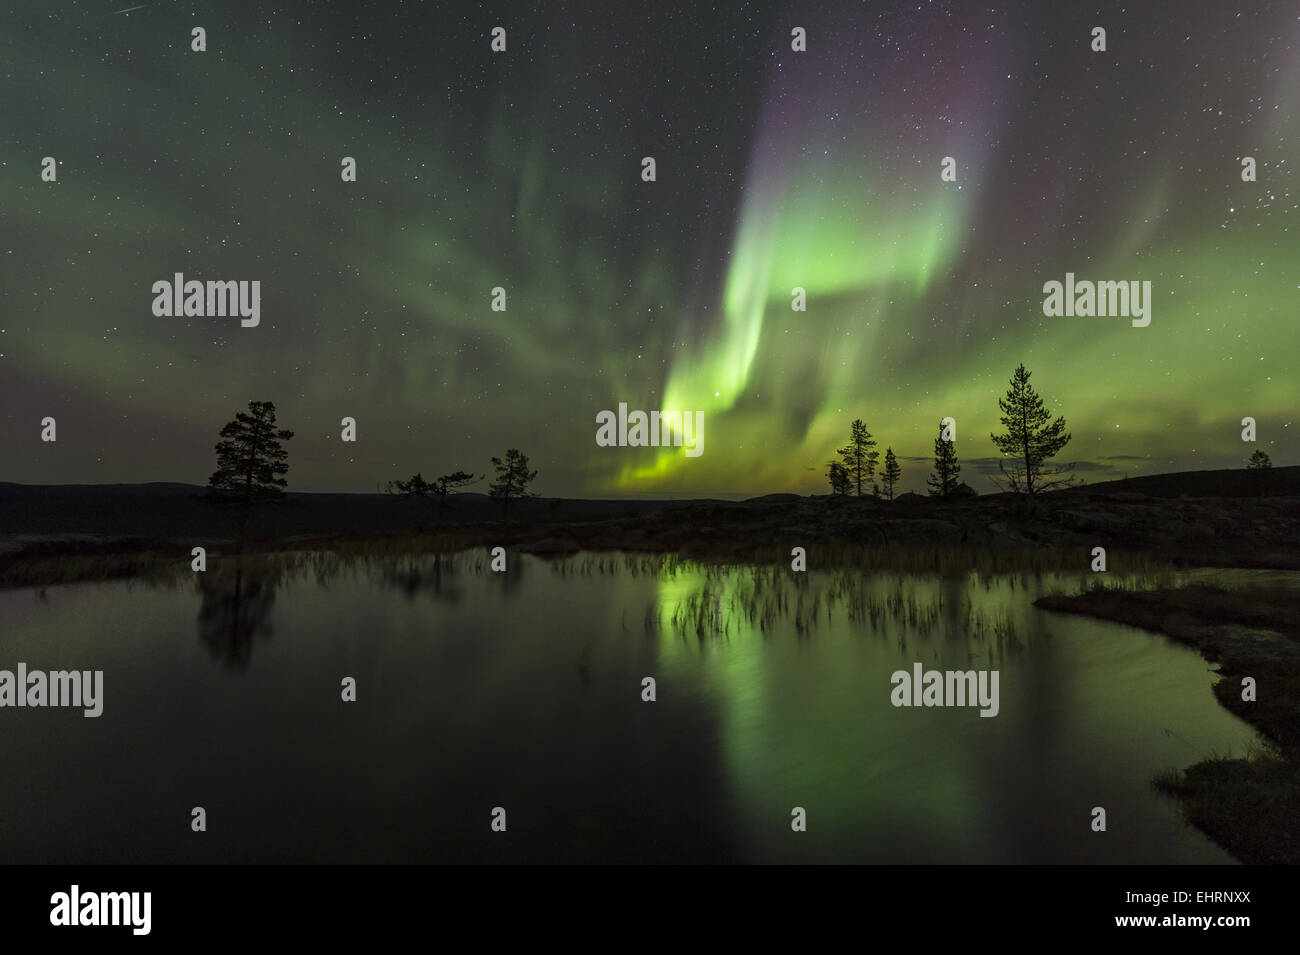 Northern lights reflecting in a lake, Sweden Stock Photo